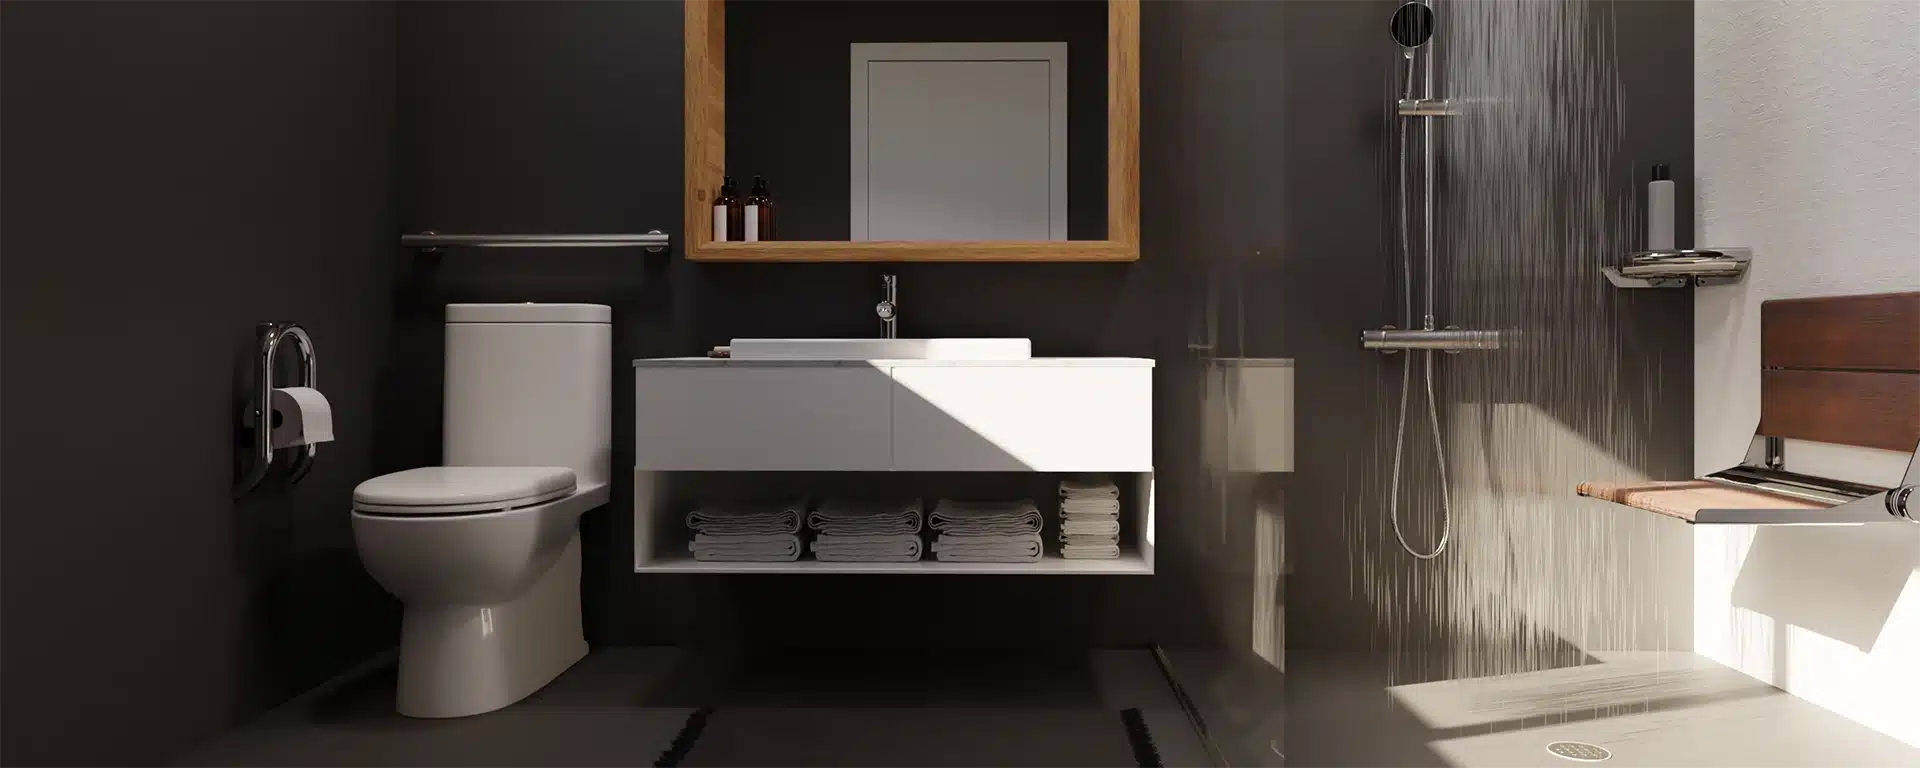 A dark bathroom with a wall-mounted seat in the shower and other safety accessories.